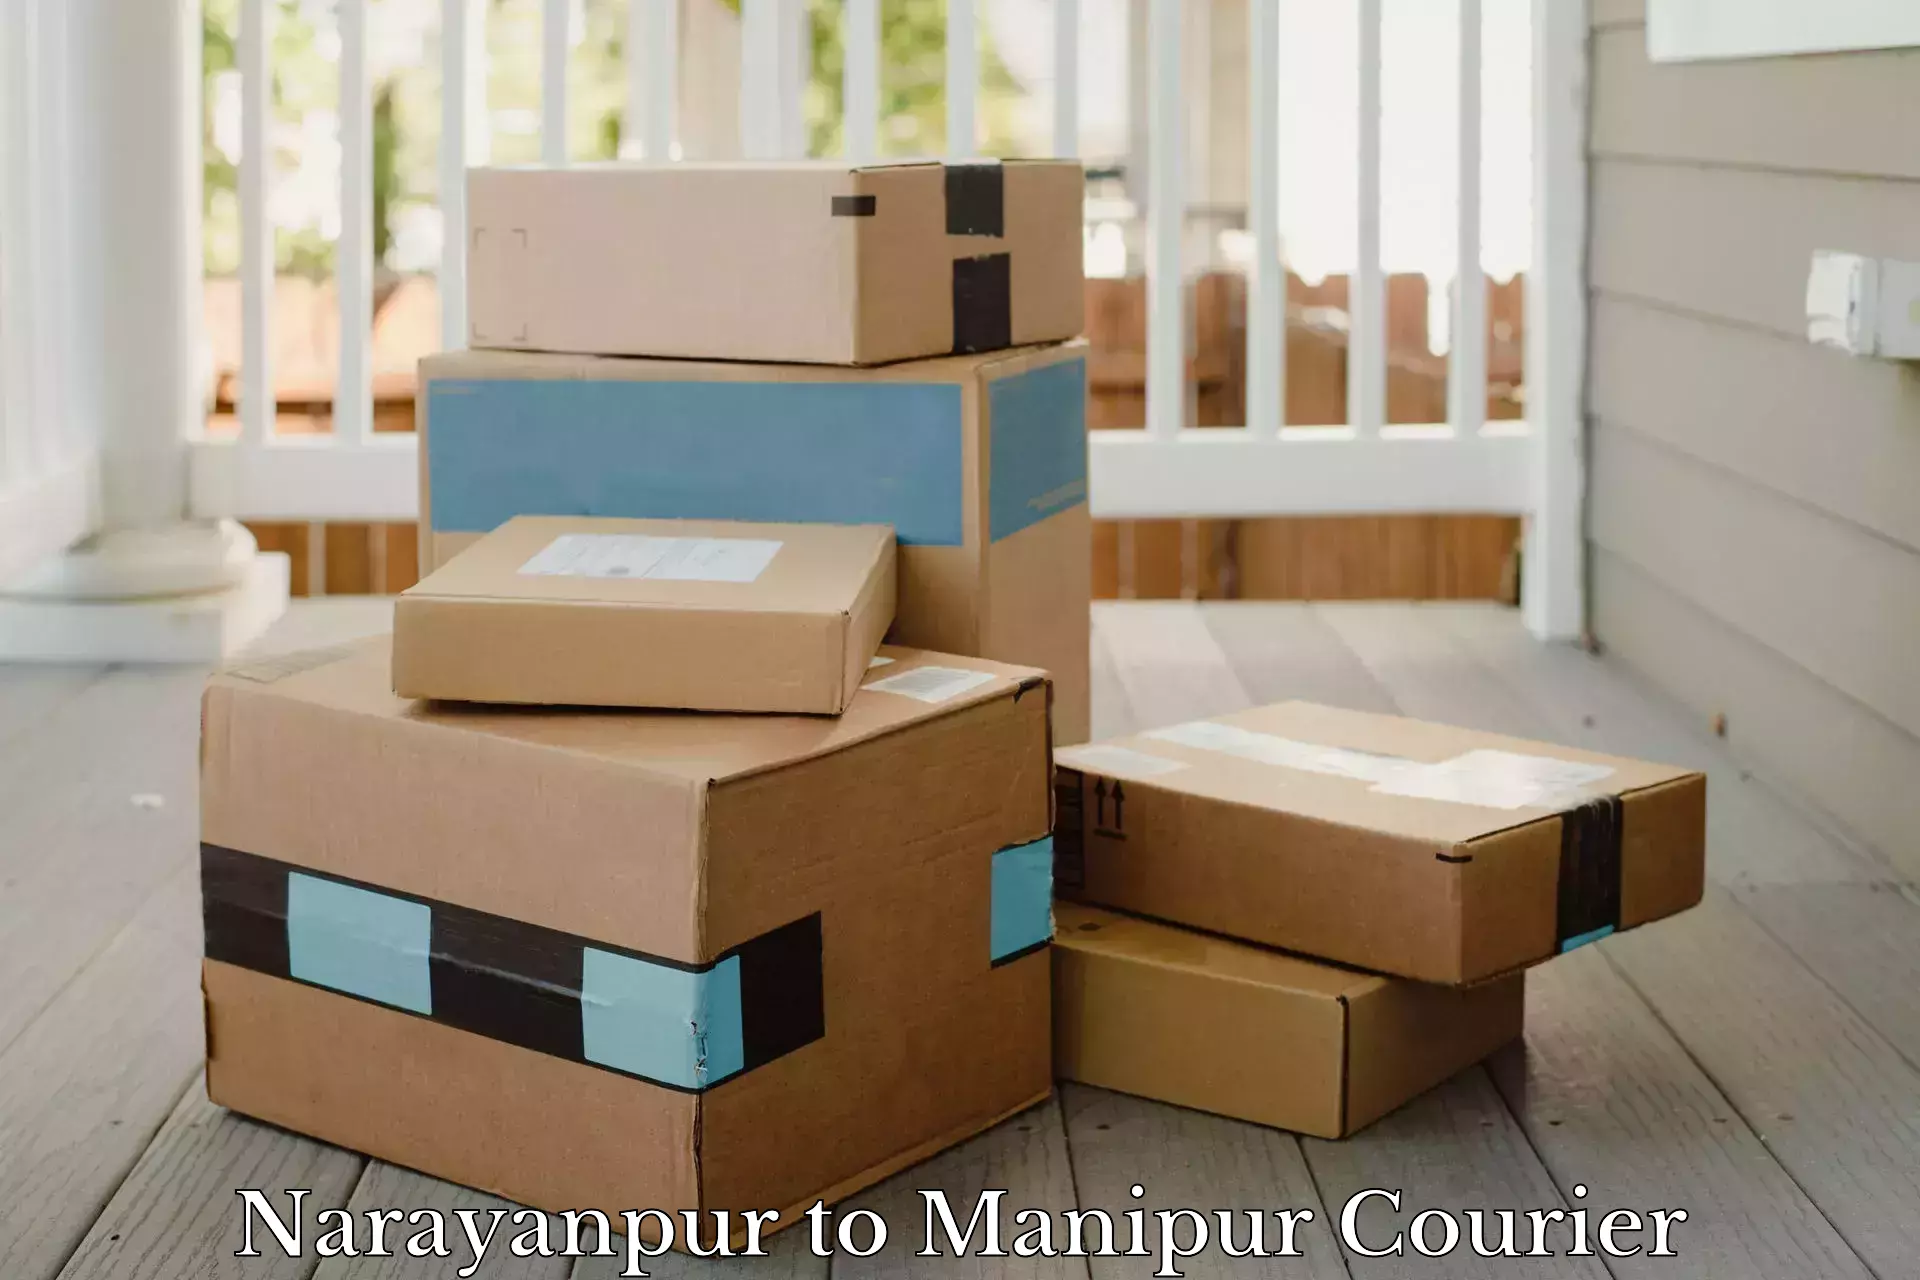 24/7 courier service in Narayanpur to Manipur